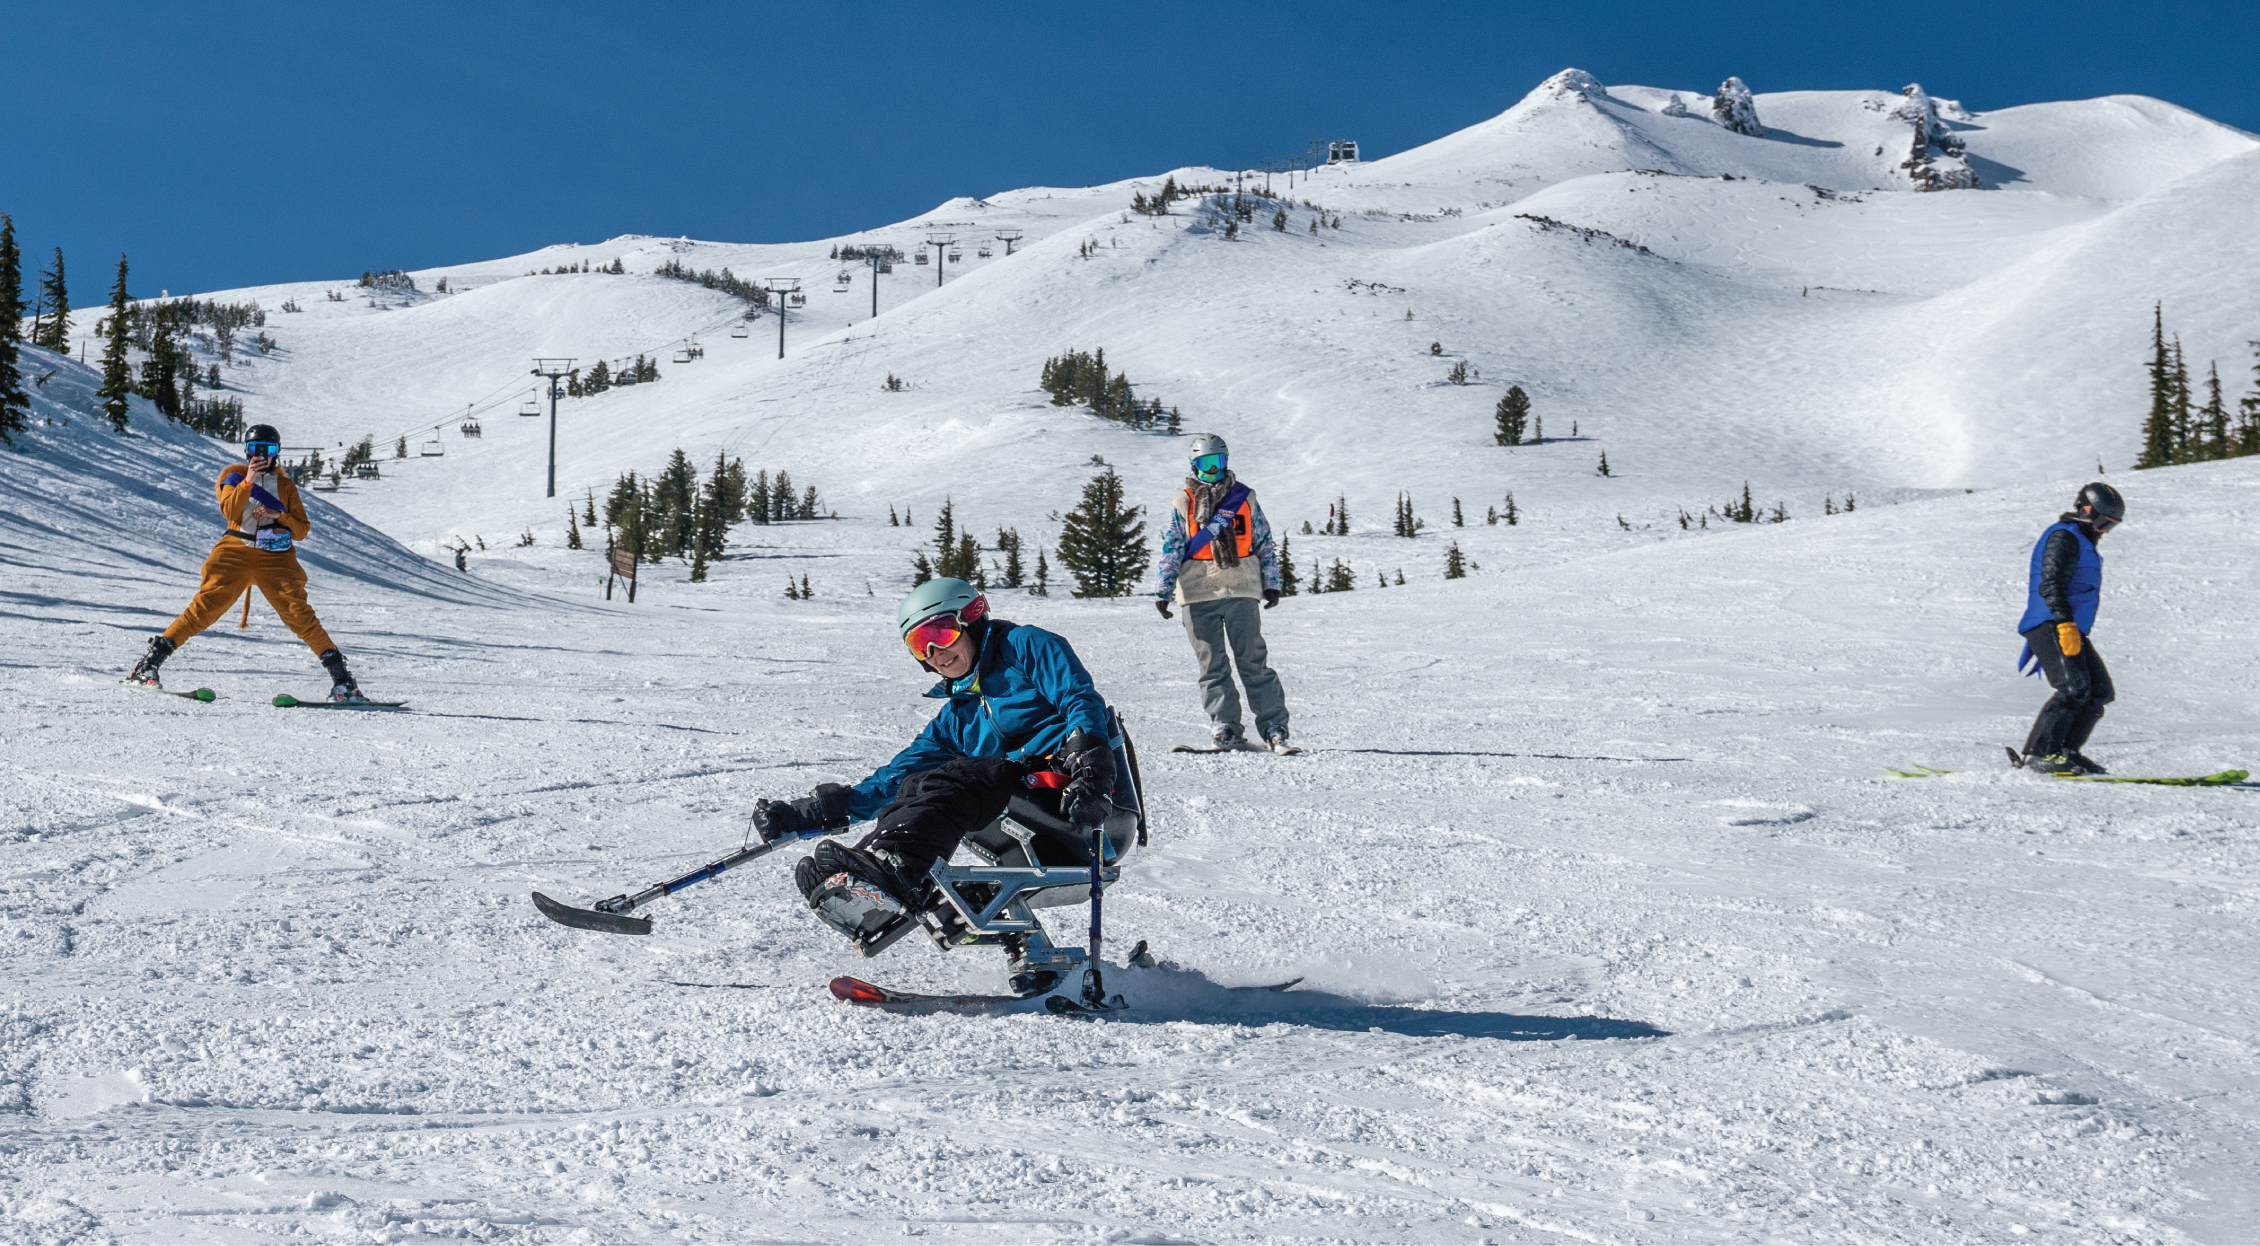 sit skier upfront gliding down the slope with instructor and two volunteers in the background. Mountains summit is visible in the far back